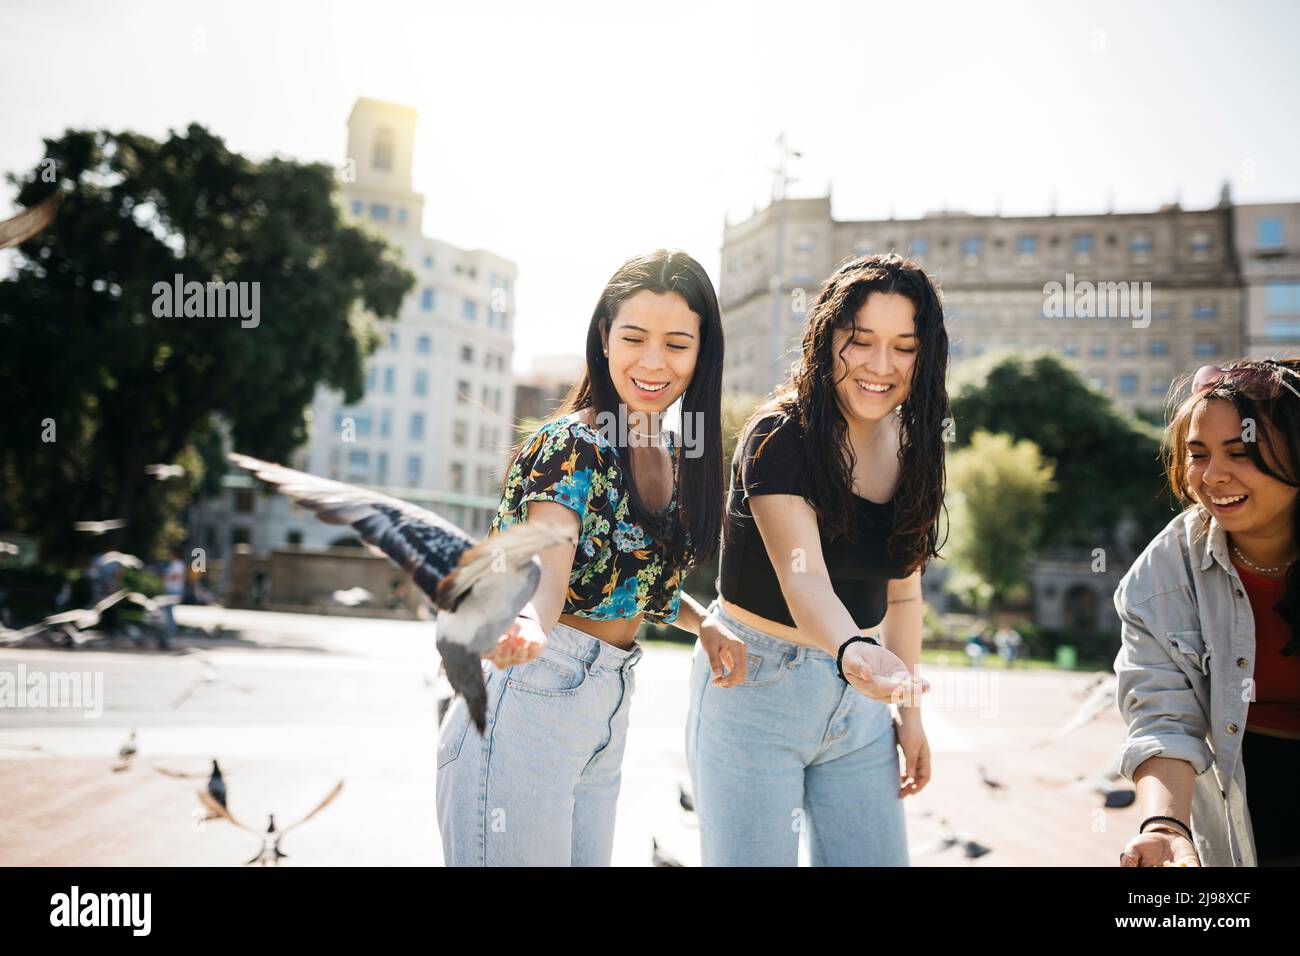 Three young women feeding pigeons in a square of a city Stock Photo